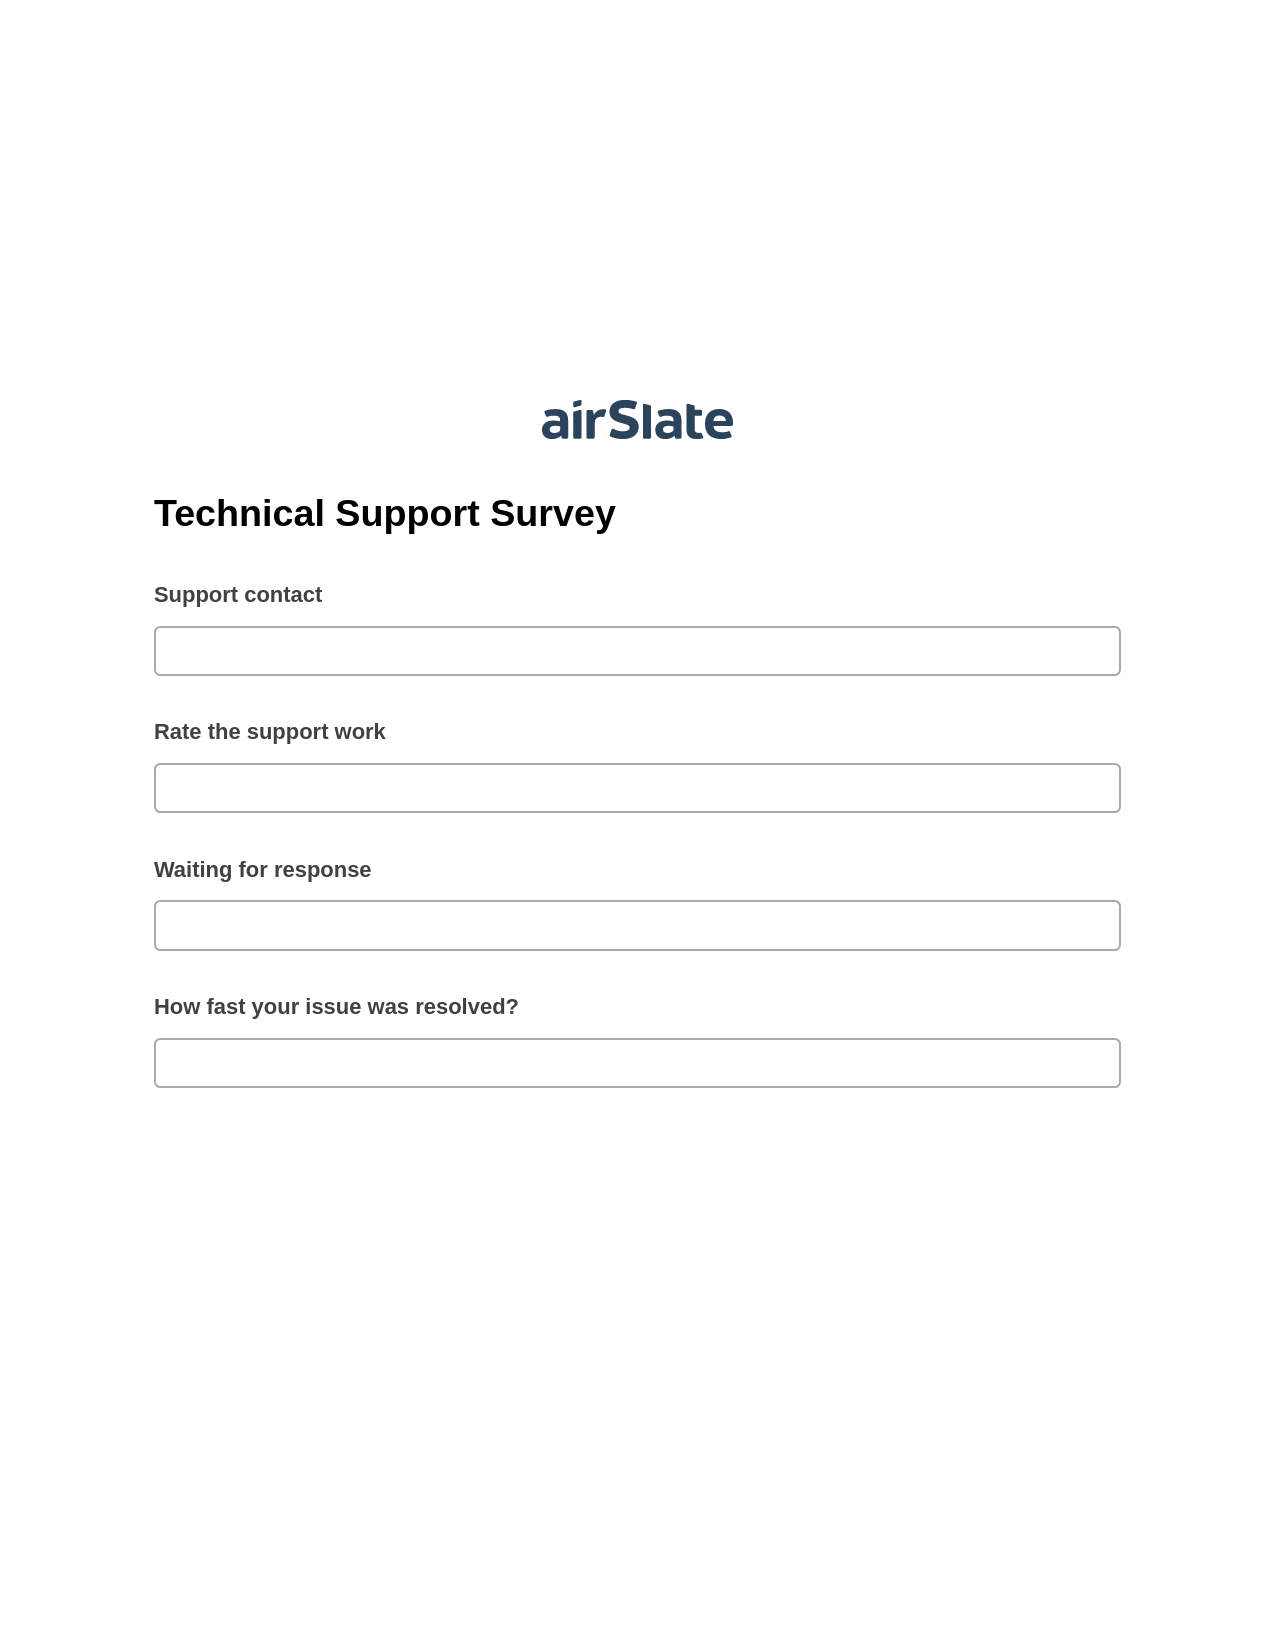 Technical Support Survey Prefill from NetSuite records, Update Salesforce Records Bot, Export to Salesforce Record Bot